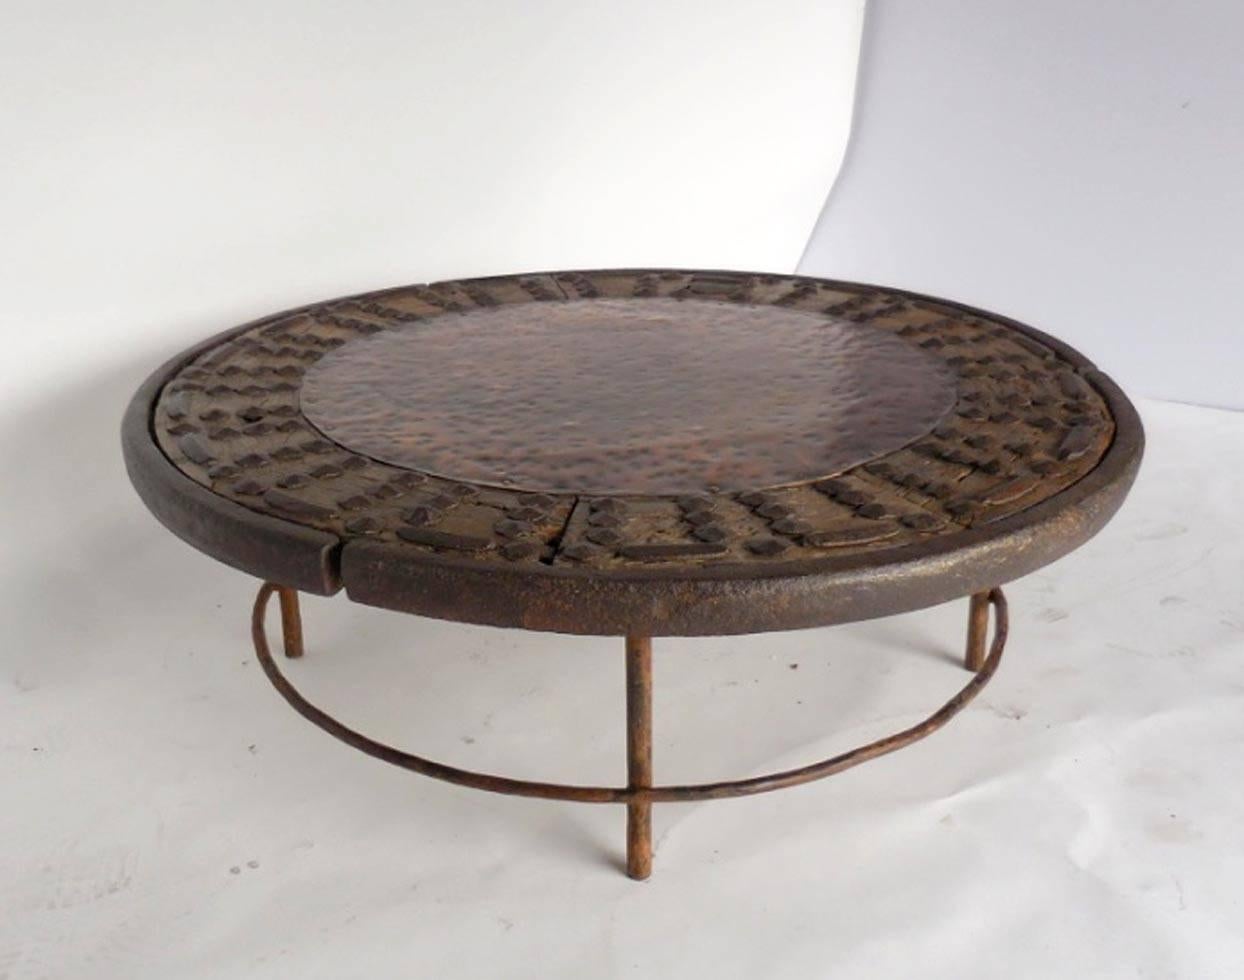 18th century Japanese iron studded, wooden wheel surrounded with iron and filled in with hammered copper. Hand-forged and hand-hammered legs. Unique table with contrasting metals and wood. y Dos Gallos Studio piece.